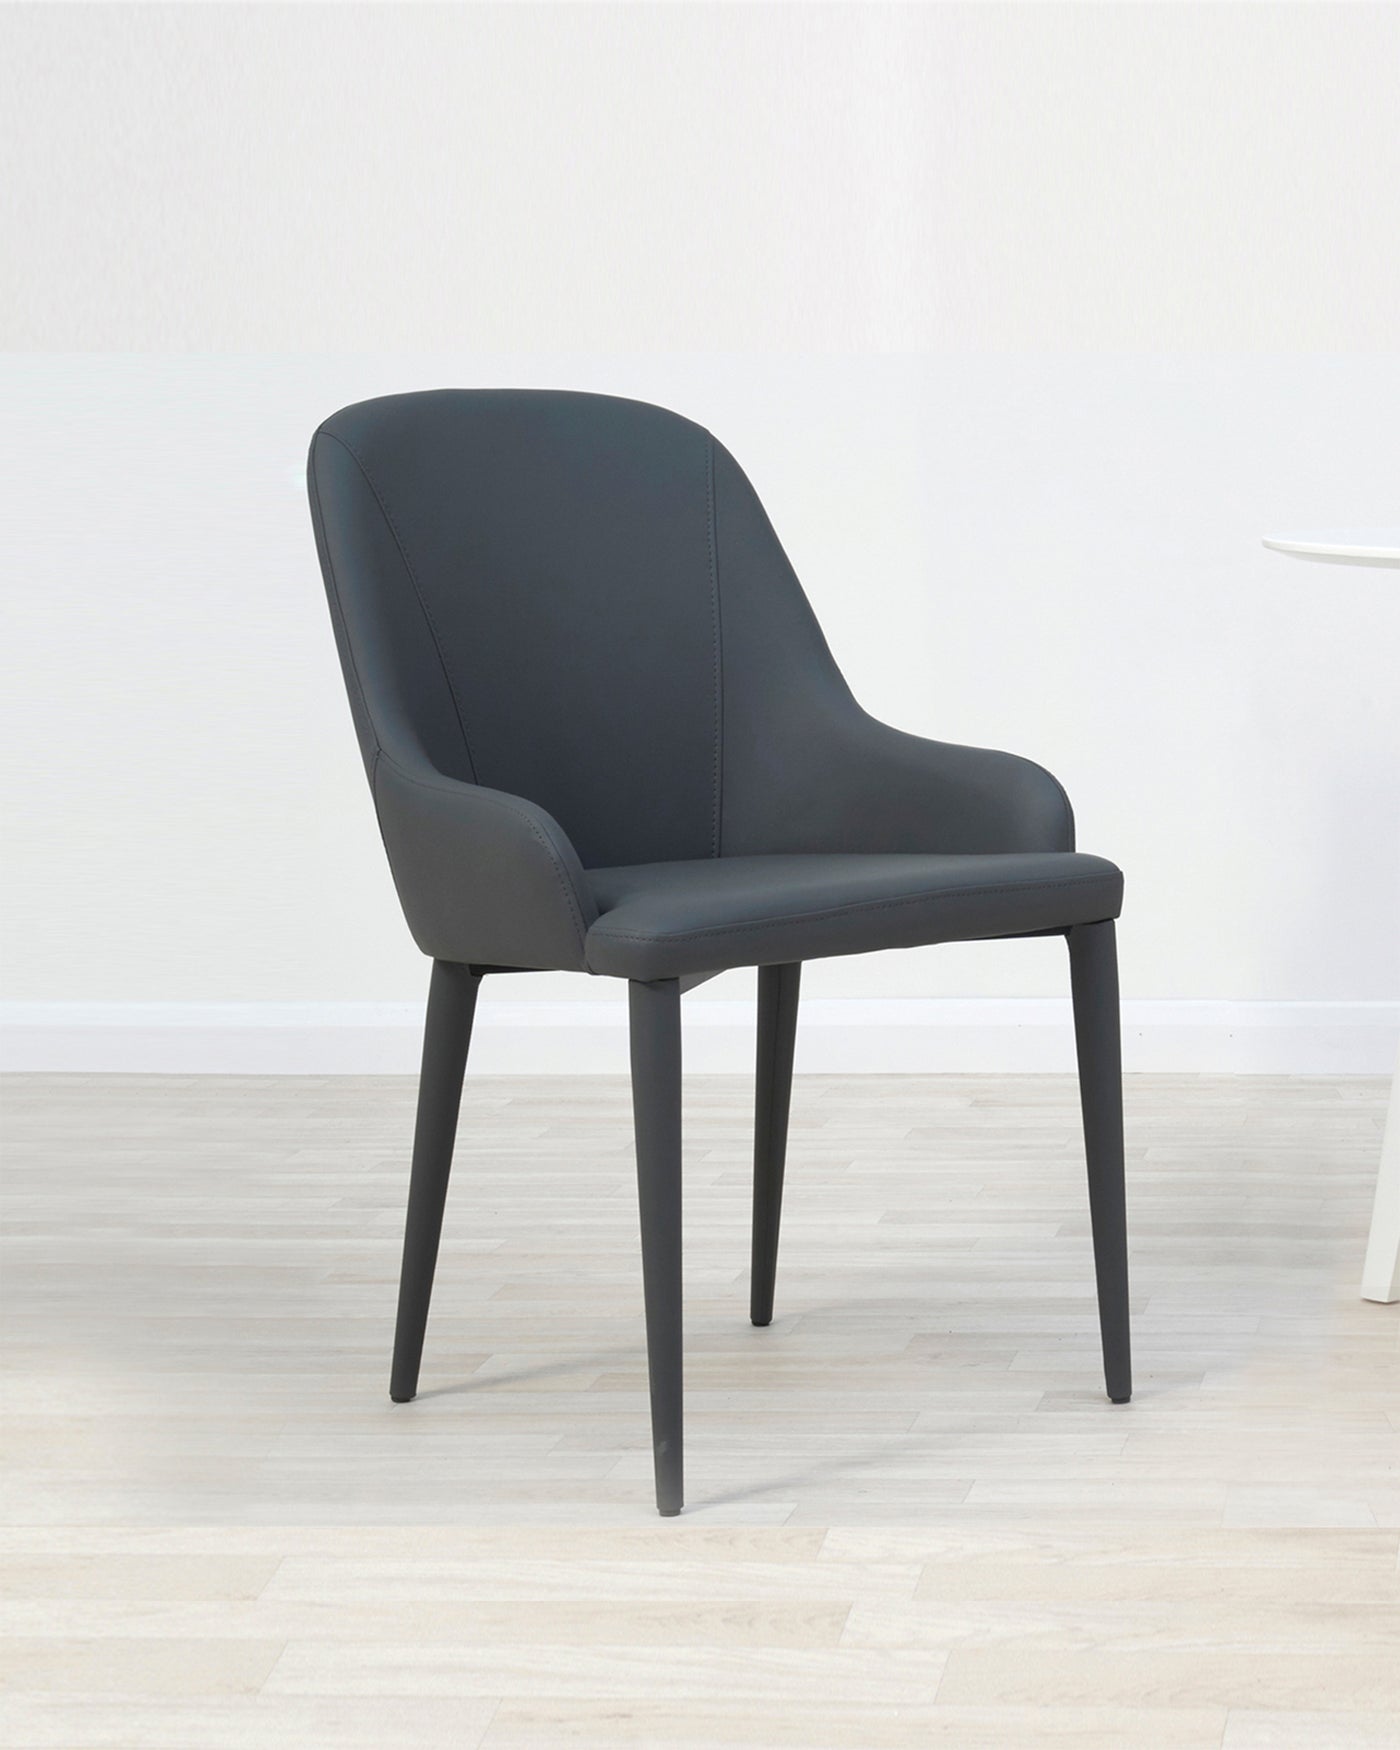 Modern charcoal grey upholstered dining chair with a curved backrest and four straight, black wooden legs.